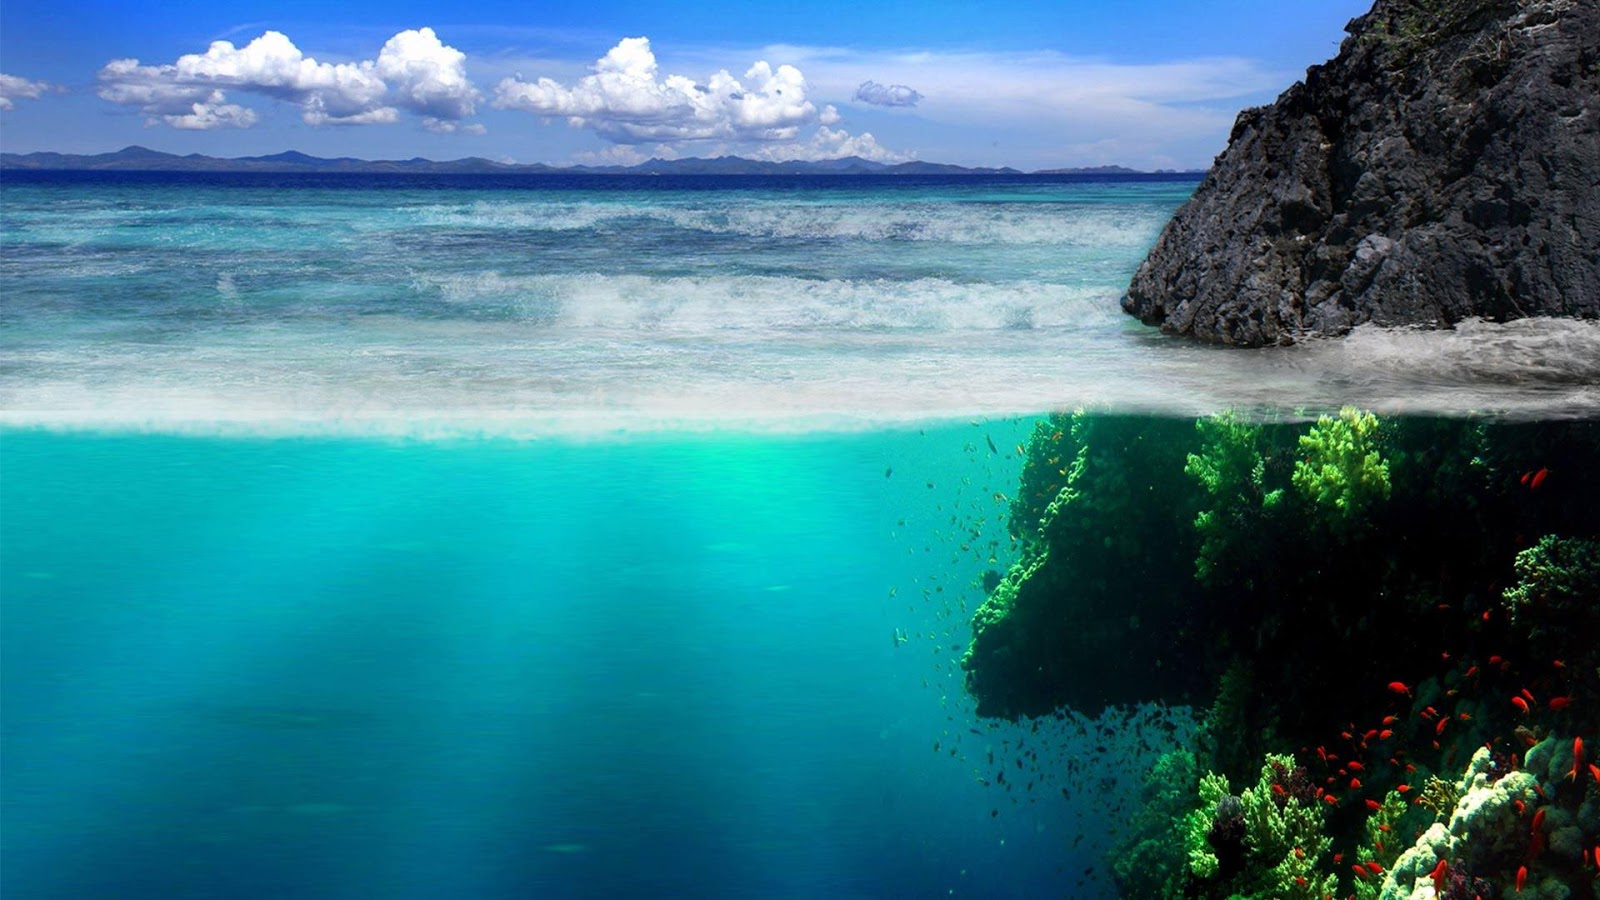 Ocean Live Wallpaper   Android Apps on Google Play 1600x900